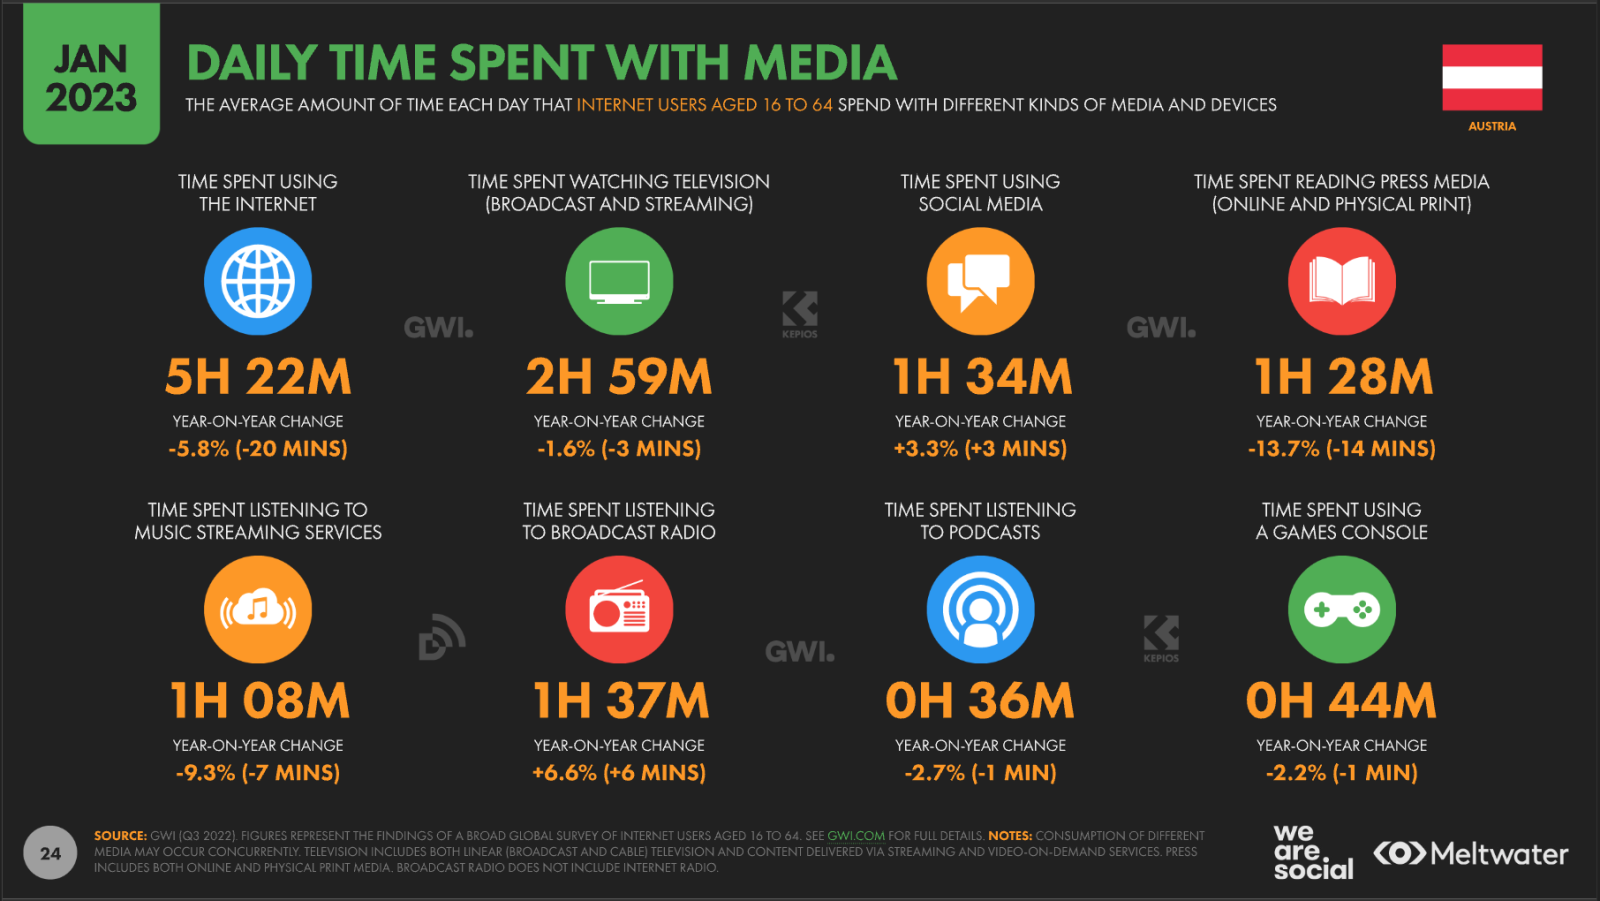 Datareportal - Digital Report 2022 Austria - Daily time spent with media